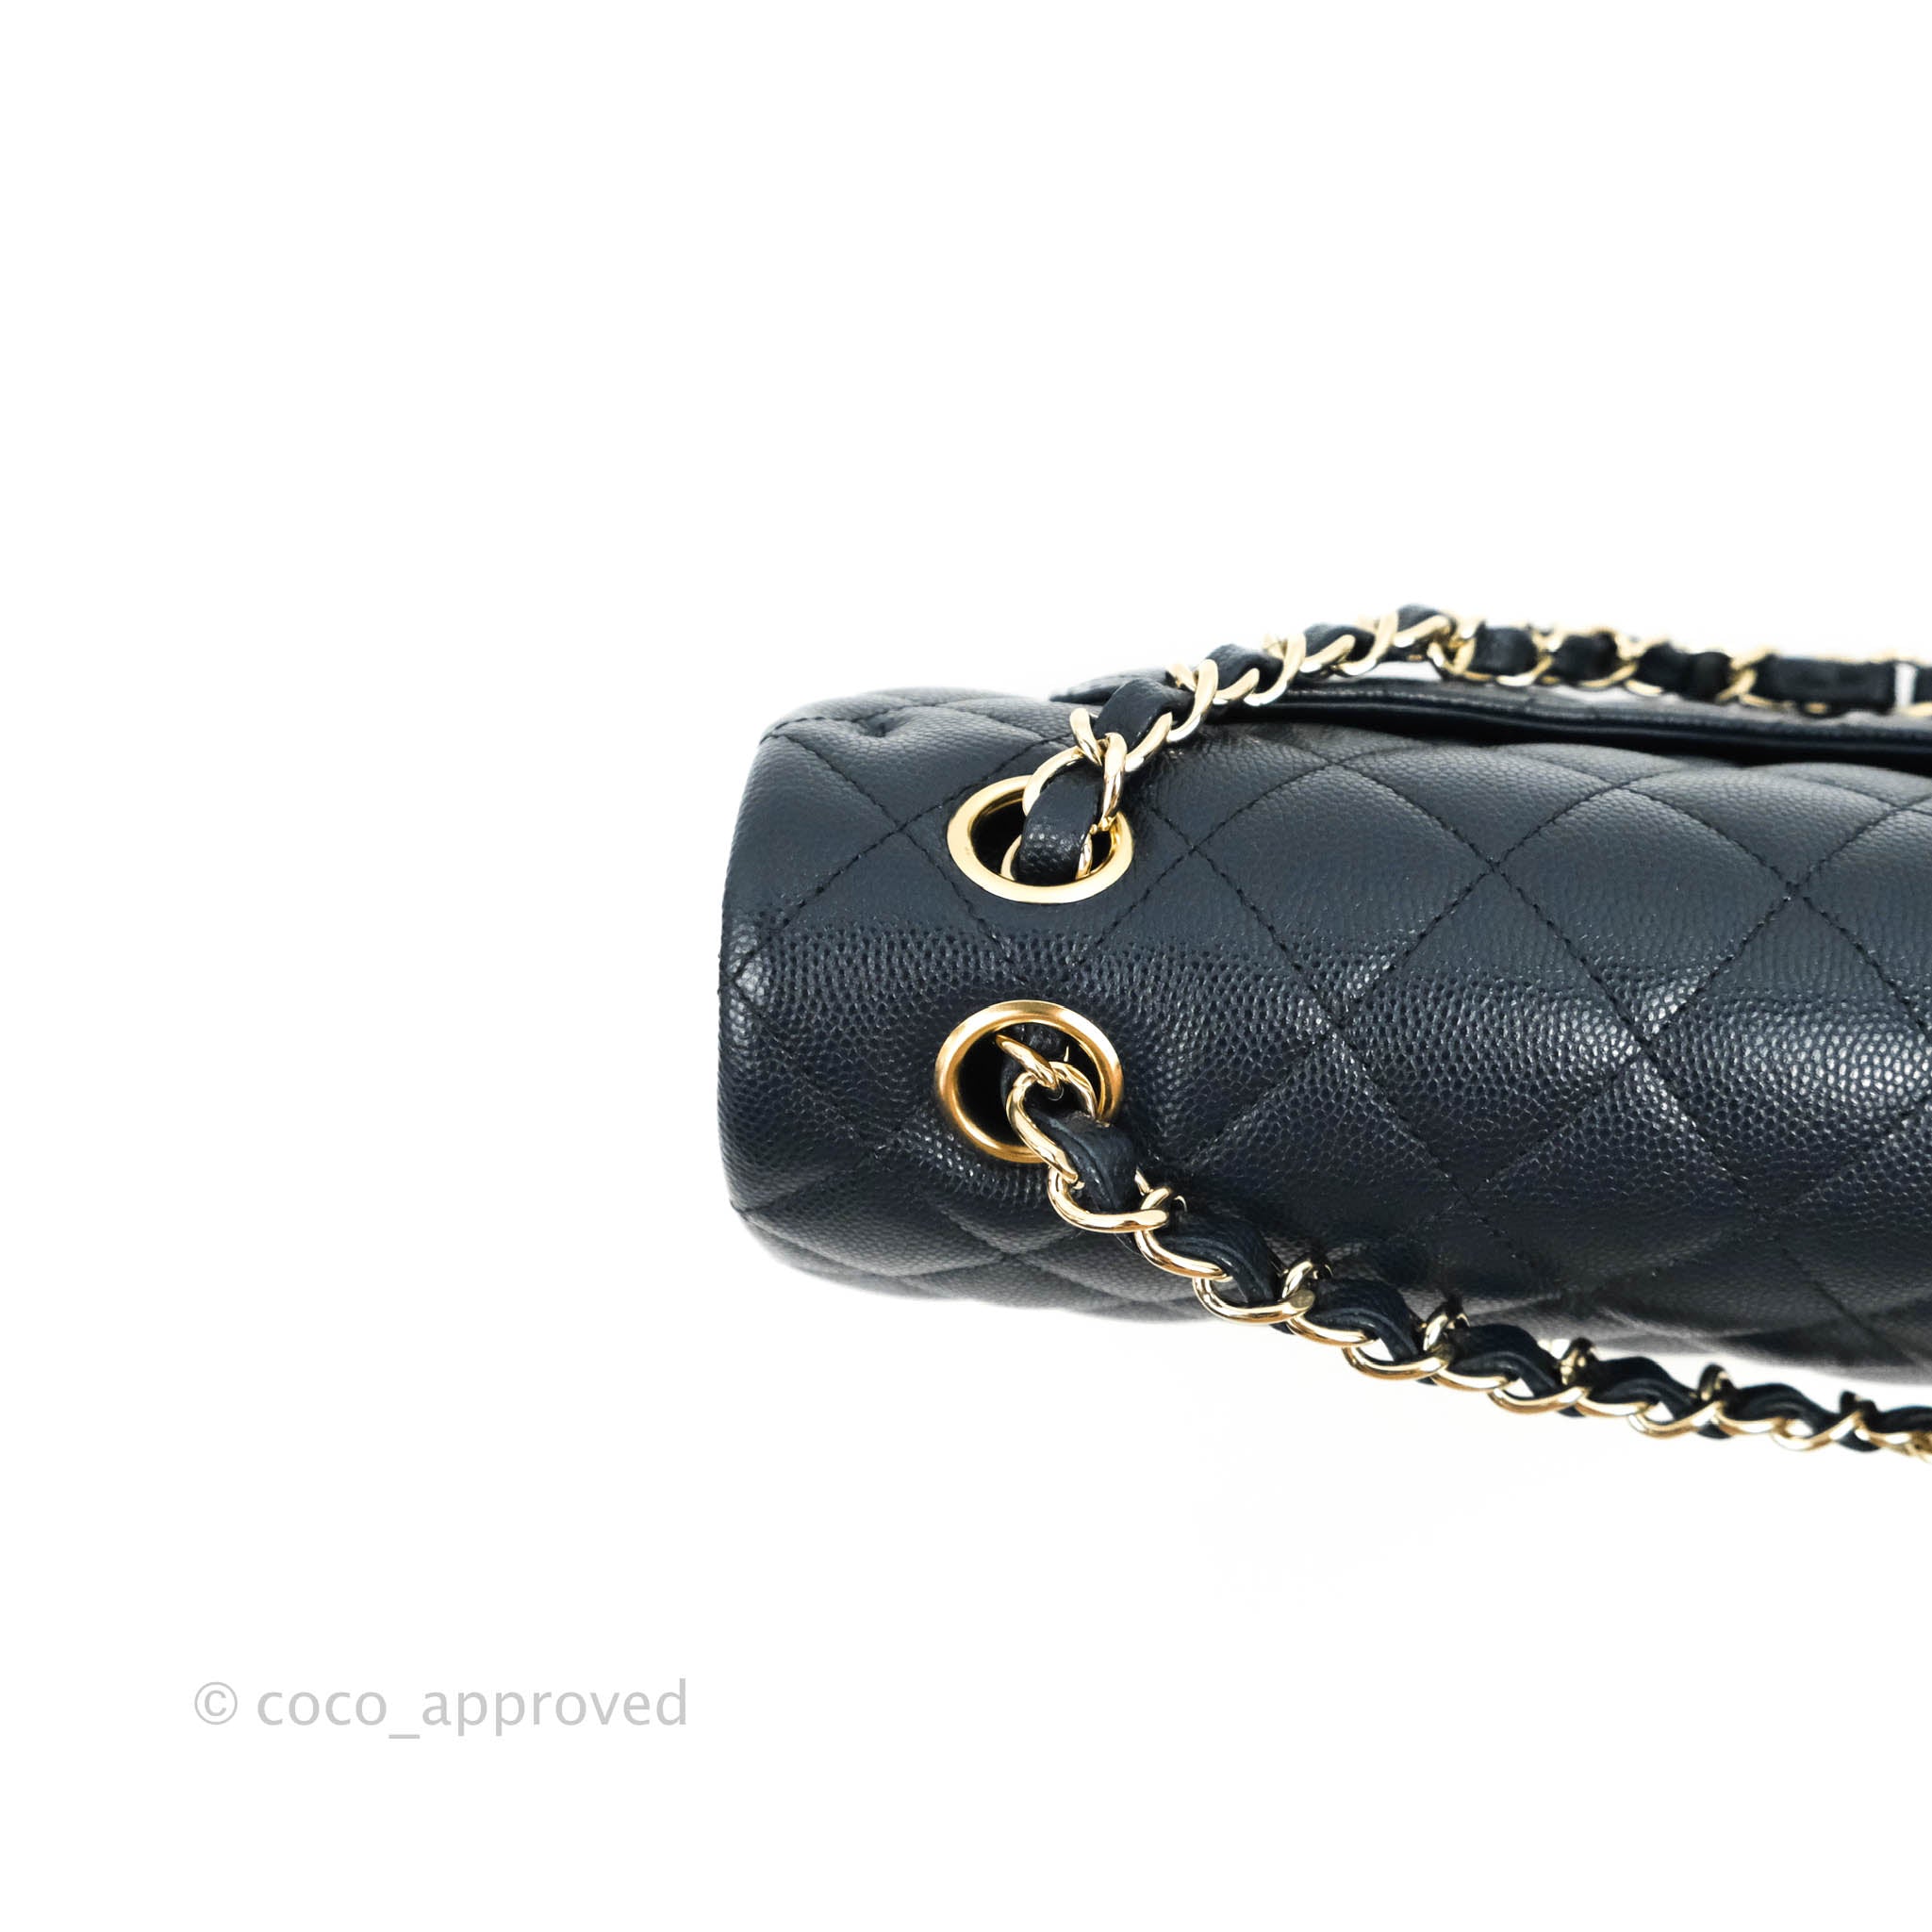 Chanel Navy Blue Caviar Leather Arch Chic Small Crossbody Flap Bag 419cas528